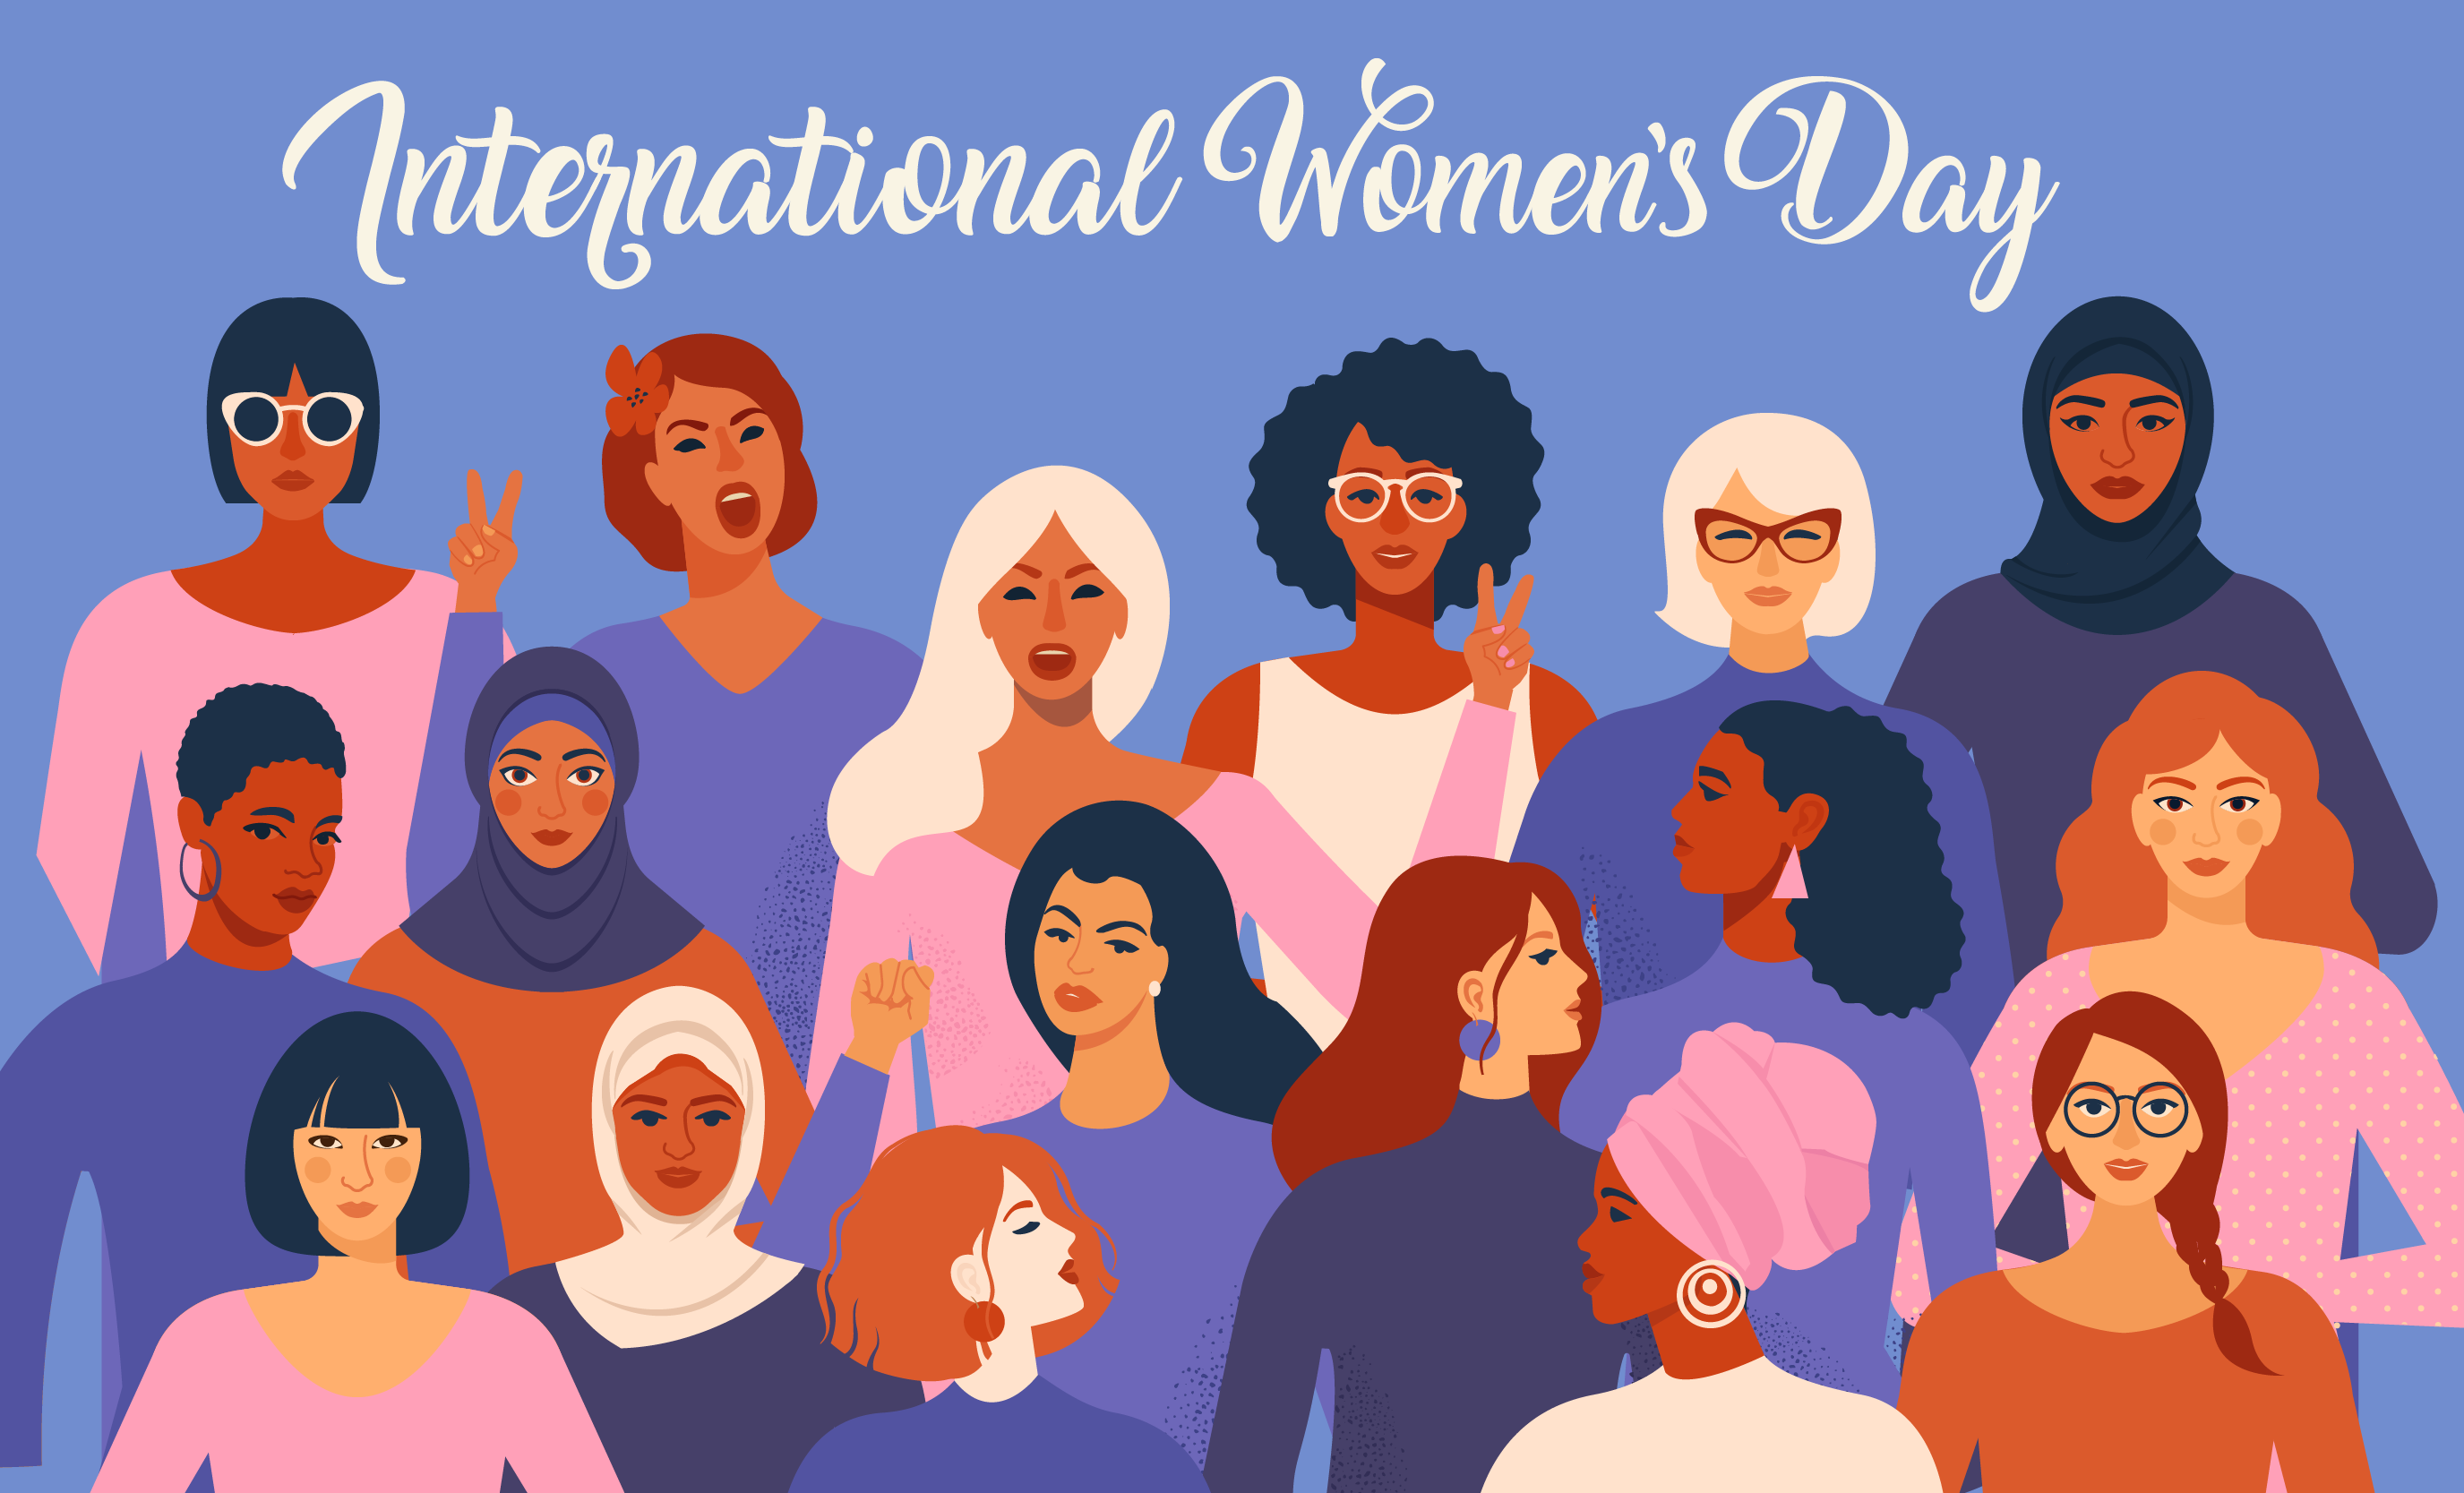 What Is The Significance, History, and Theme Of International Women’s Day 2022?